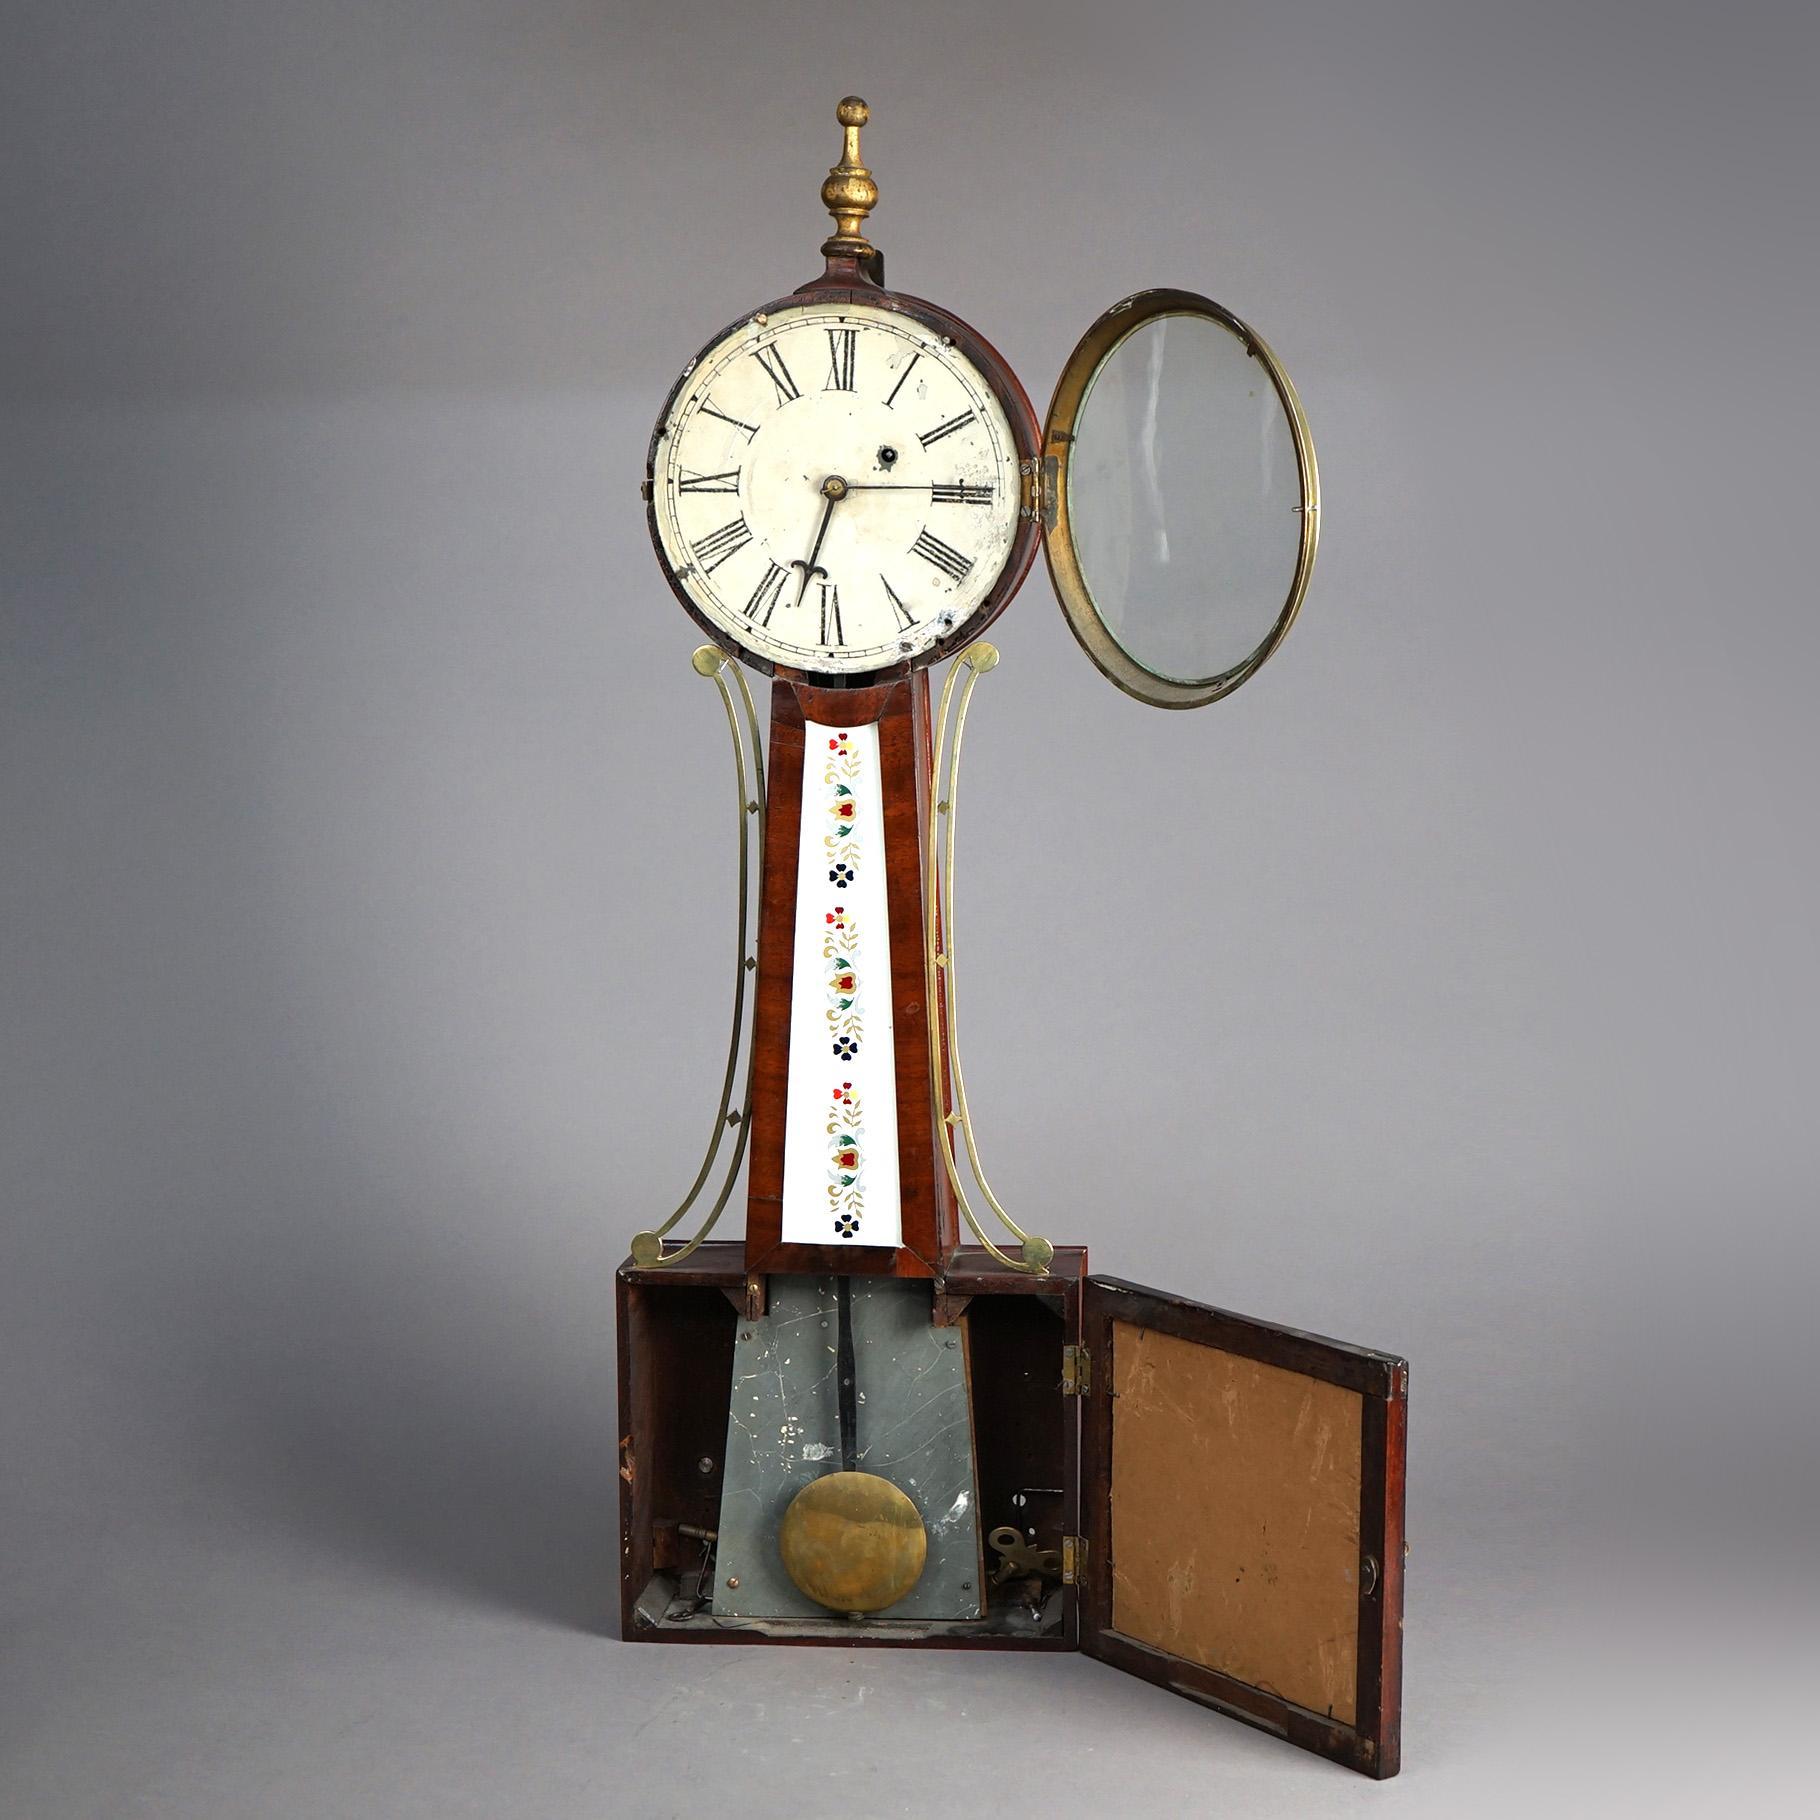 Antique Waterbury Mahogany Banjo Clock with Eglomise Painted Panel Circa 1830

Measures- 33.5''H x 10''W x 4''D